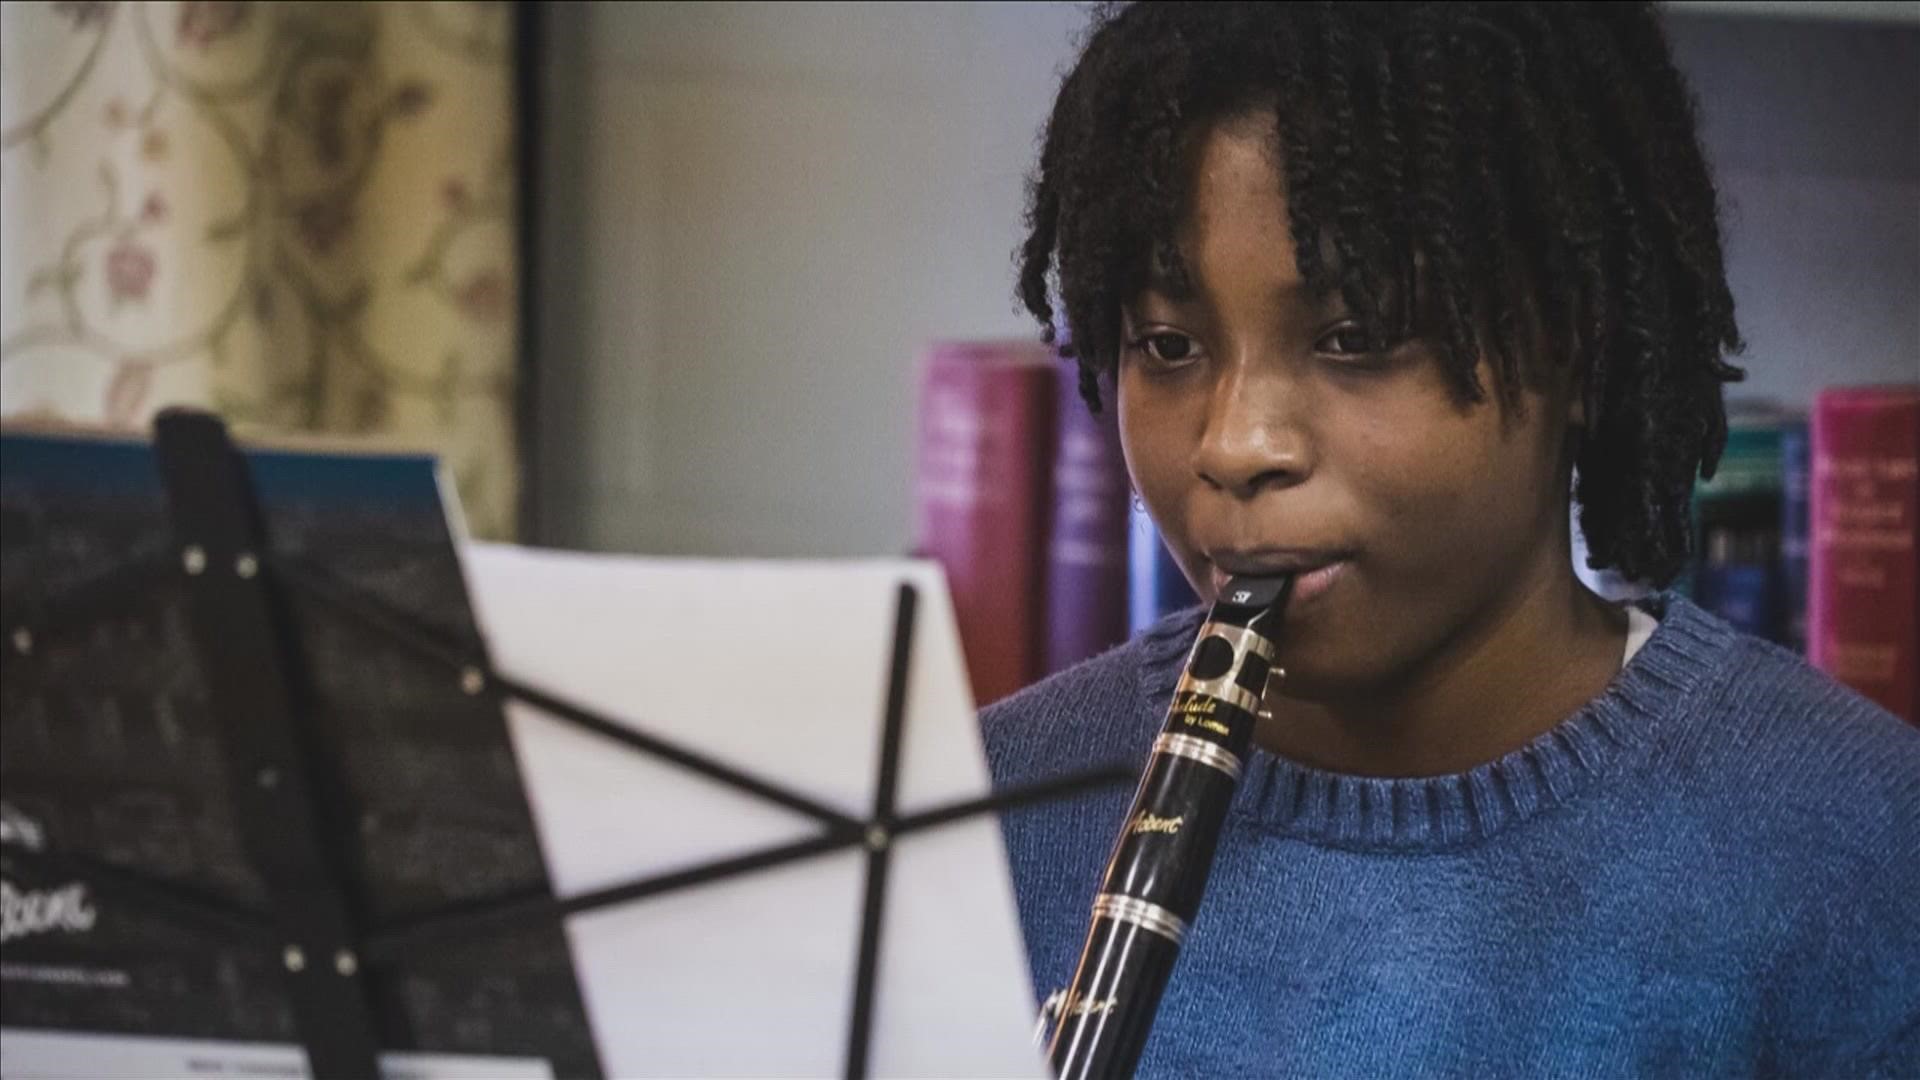 Kids as young as five are learning how to play musical instruments through the program.